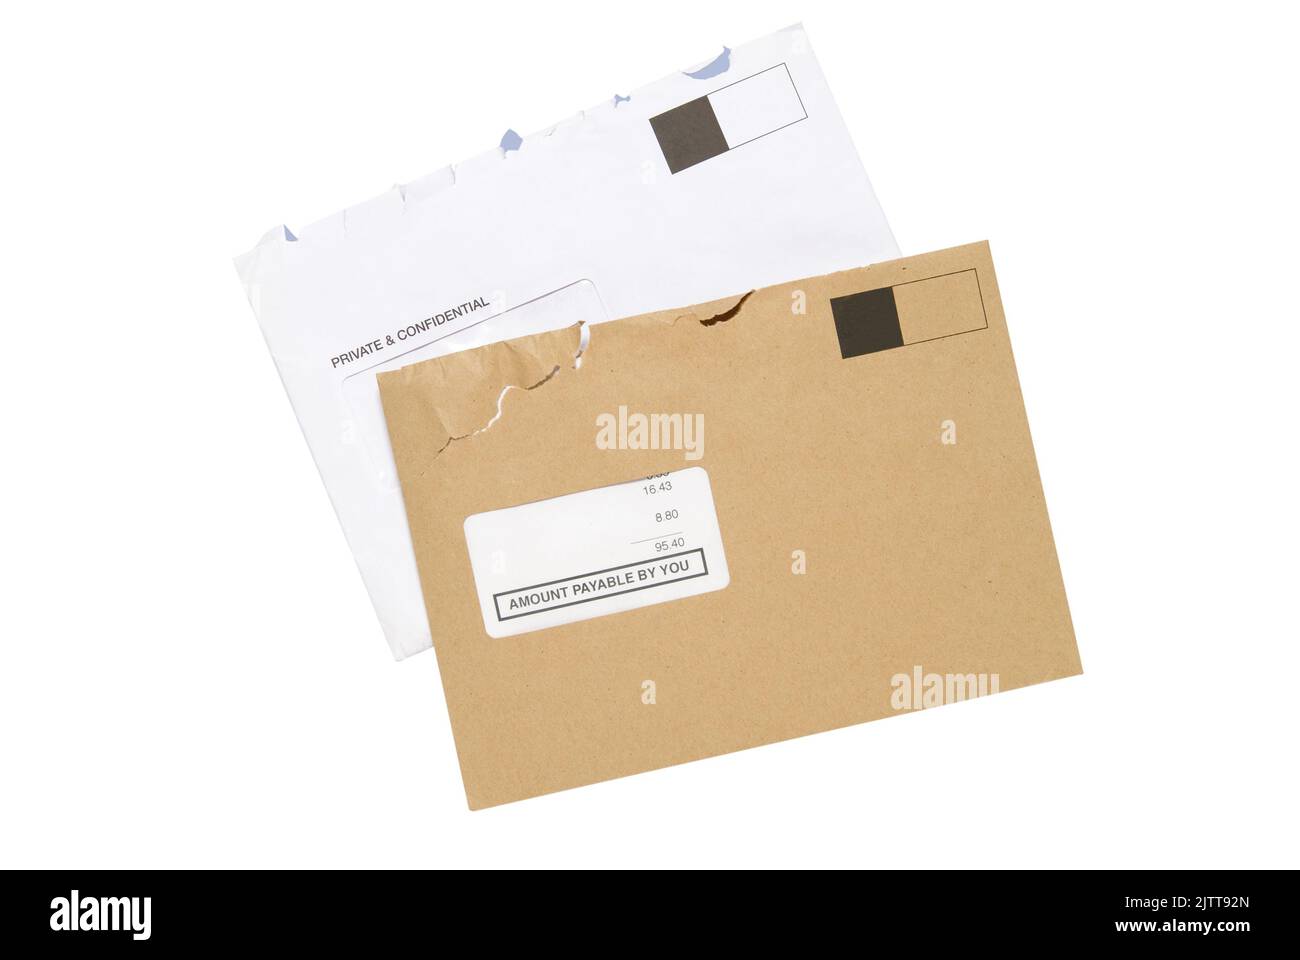 Two envelopes brown and white containing bills isolated with path cut out Stock Photo